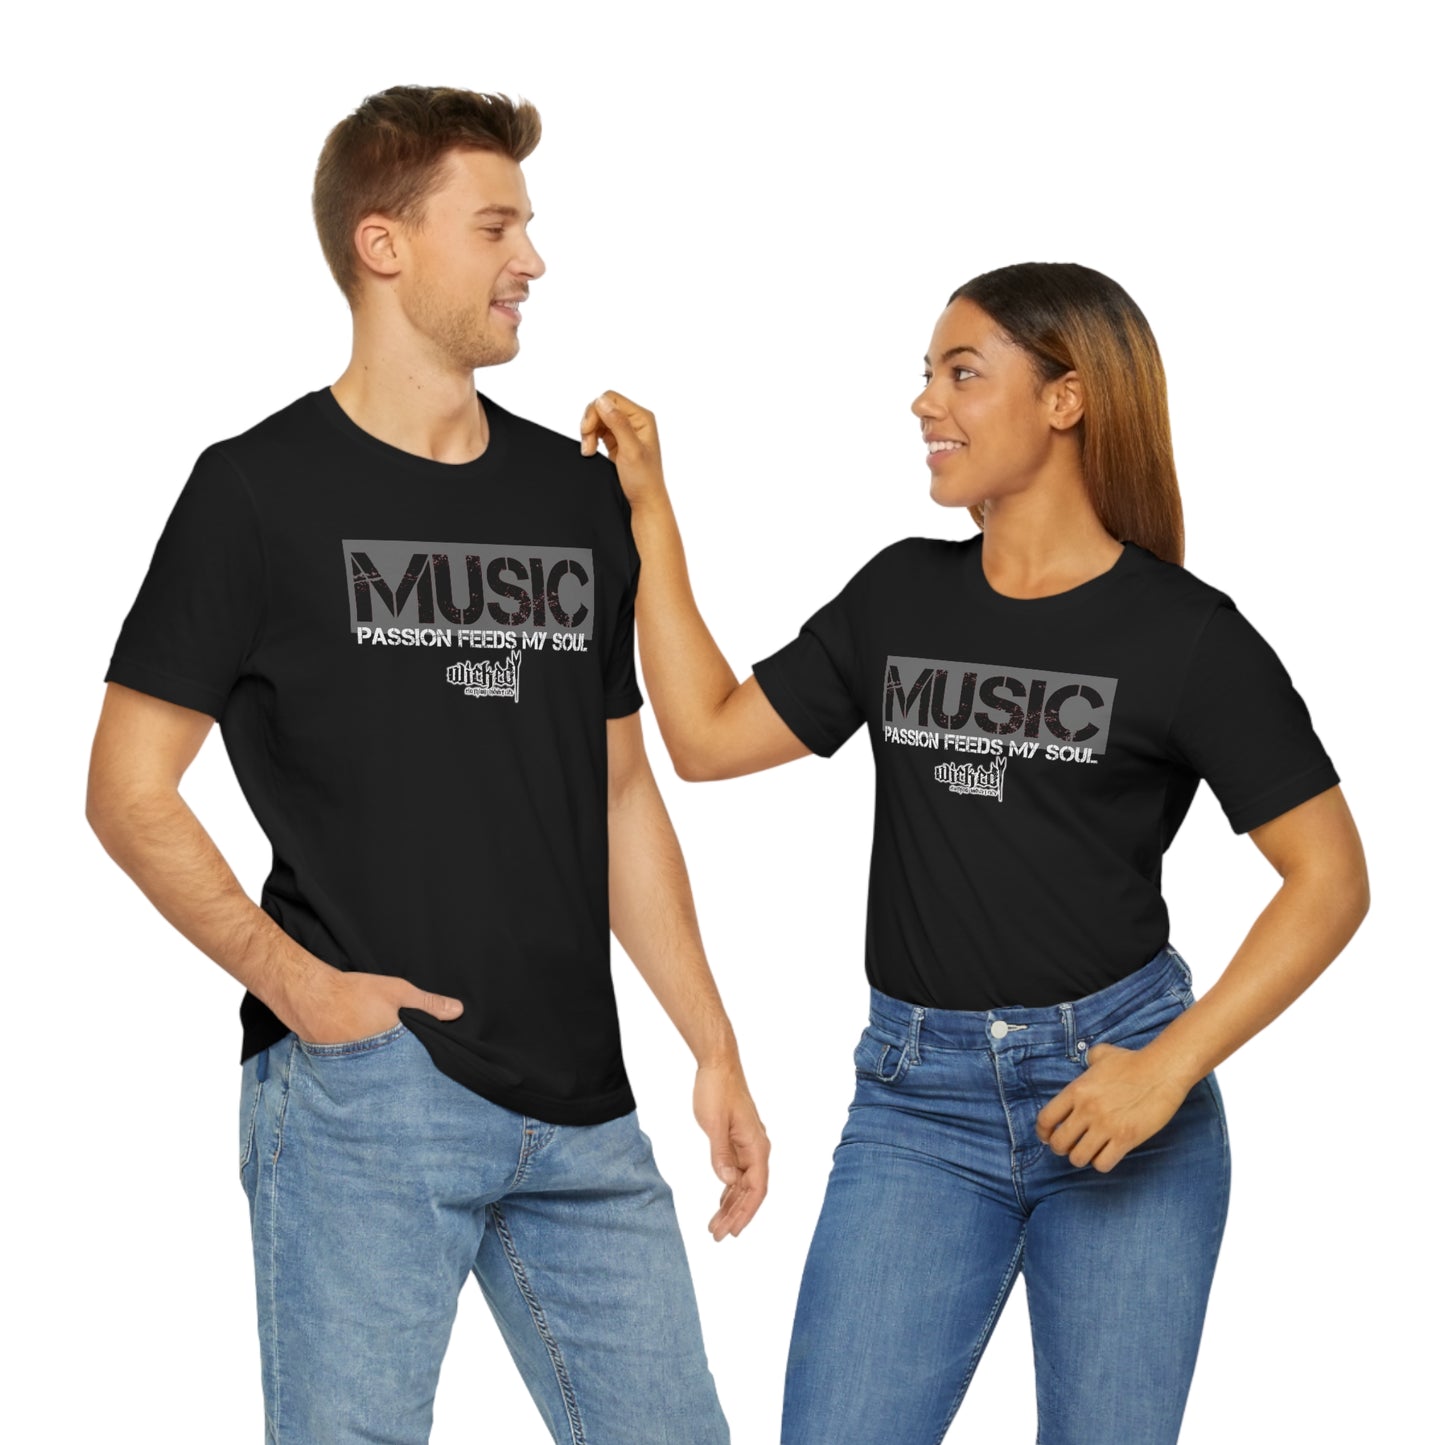 MUSIC / Passion Feeds The Soul /Gray/ Short Sleeve Tee